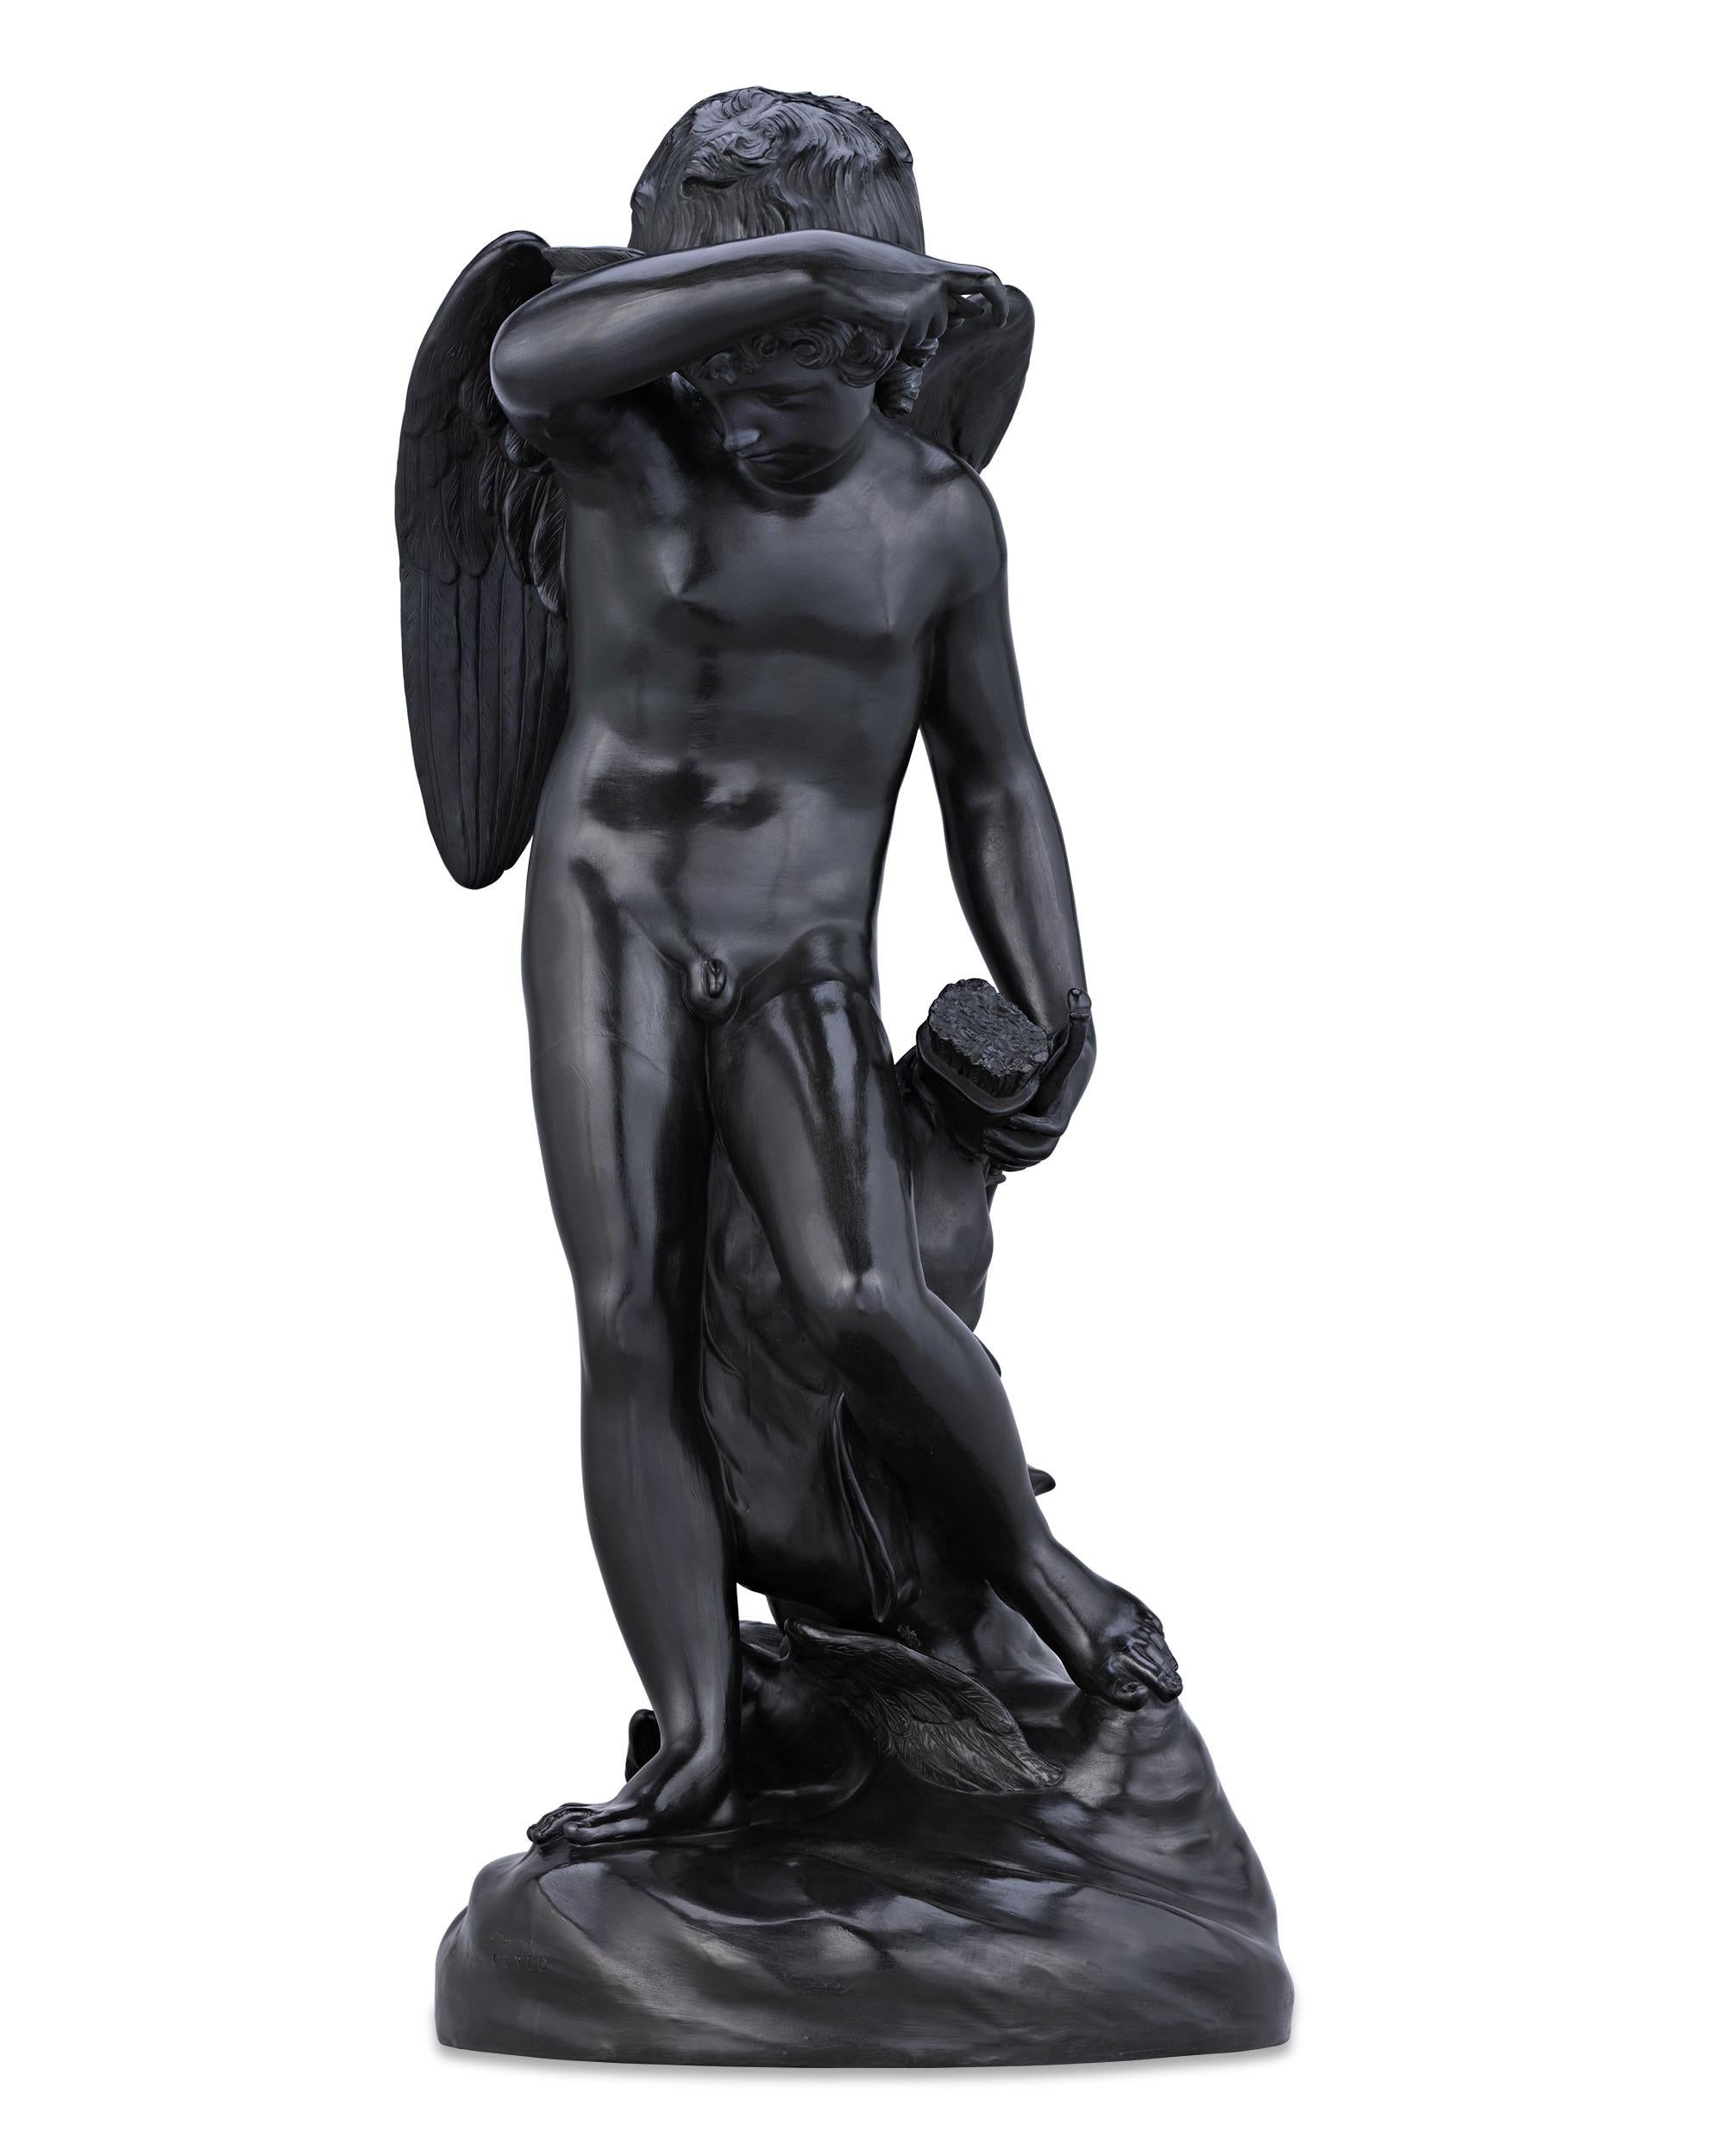 An important homage to love, this large black basalt figure is an impressive example of Wedgwood's artistry and imagination. Cupid, the ancient Roman god of love, is standing amongst billowing clouds with a pair of doves at his feet. Gazing towards